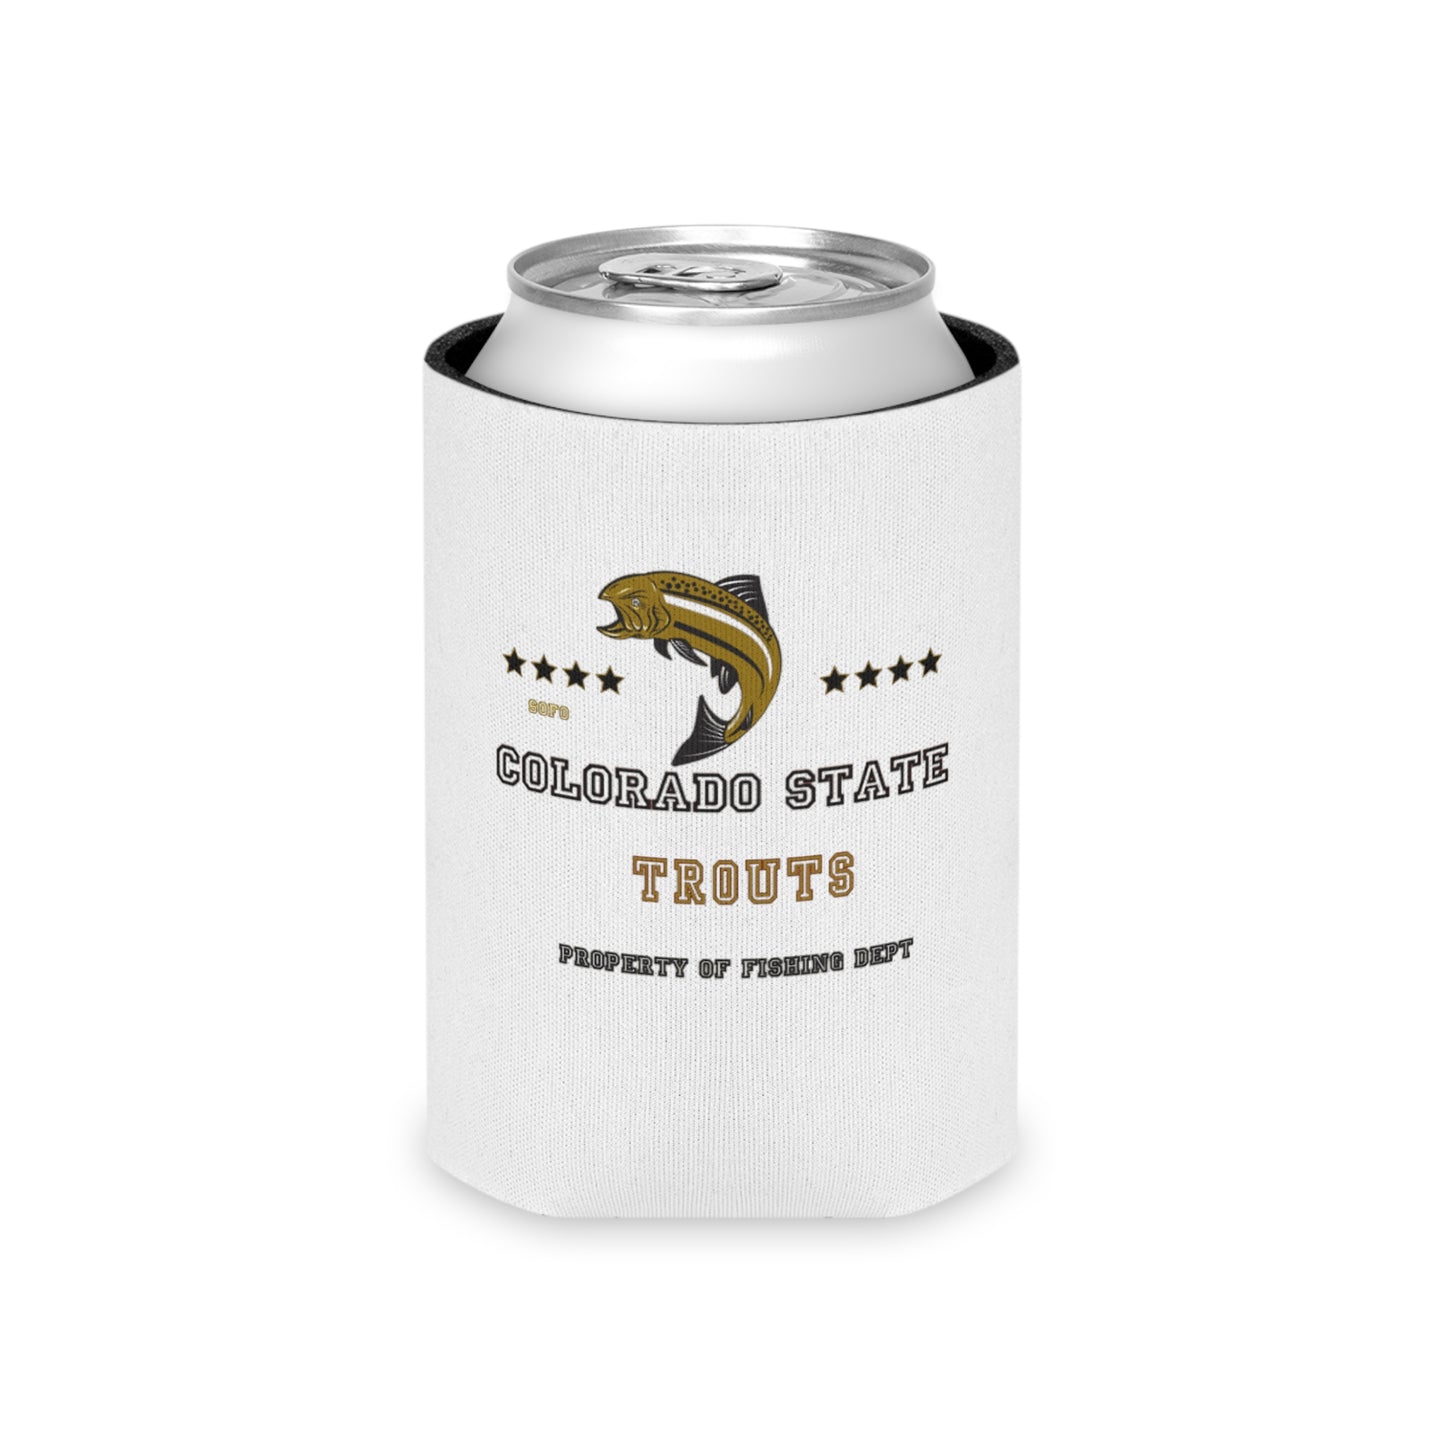 Colorado State Trouts Property Can Cooler